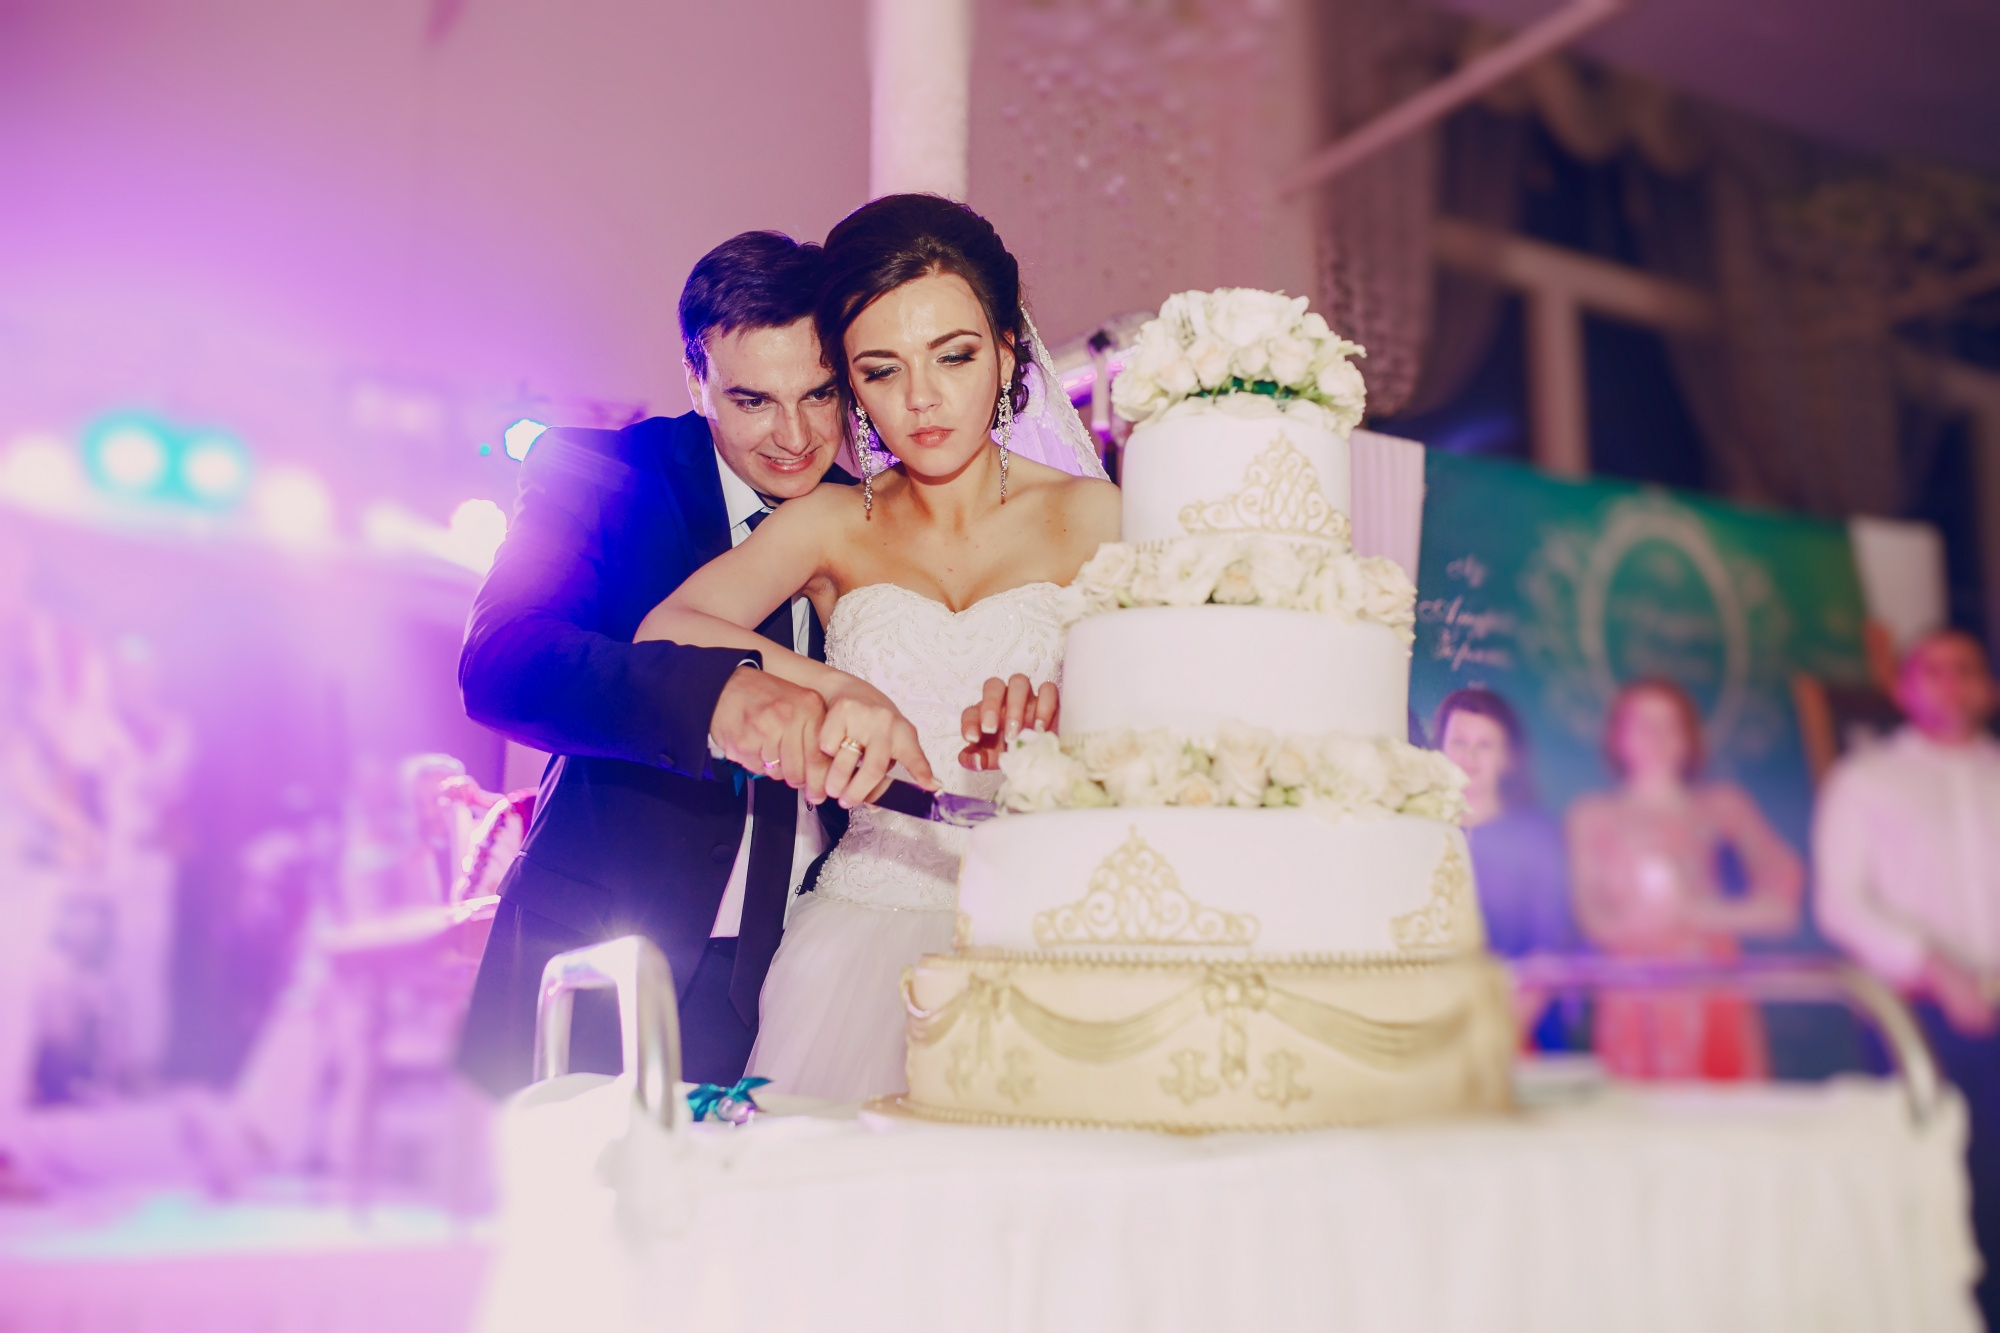 A newly-wed couple is seen cutting their wedding cake | Source: freepik